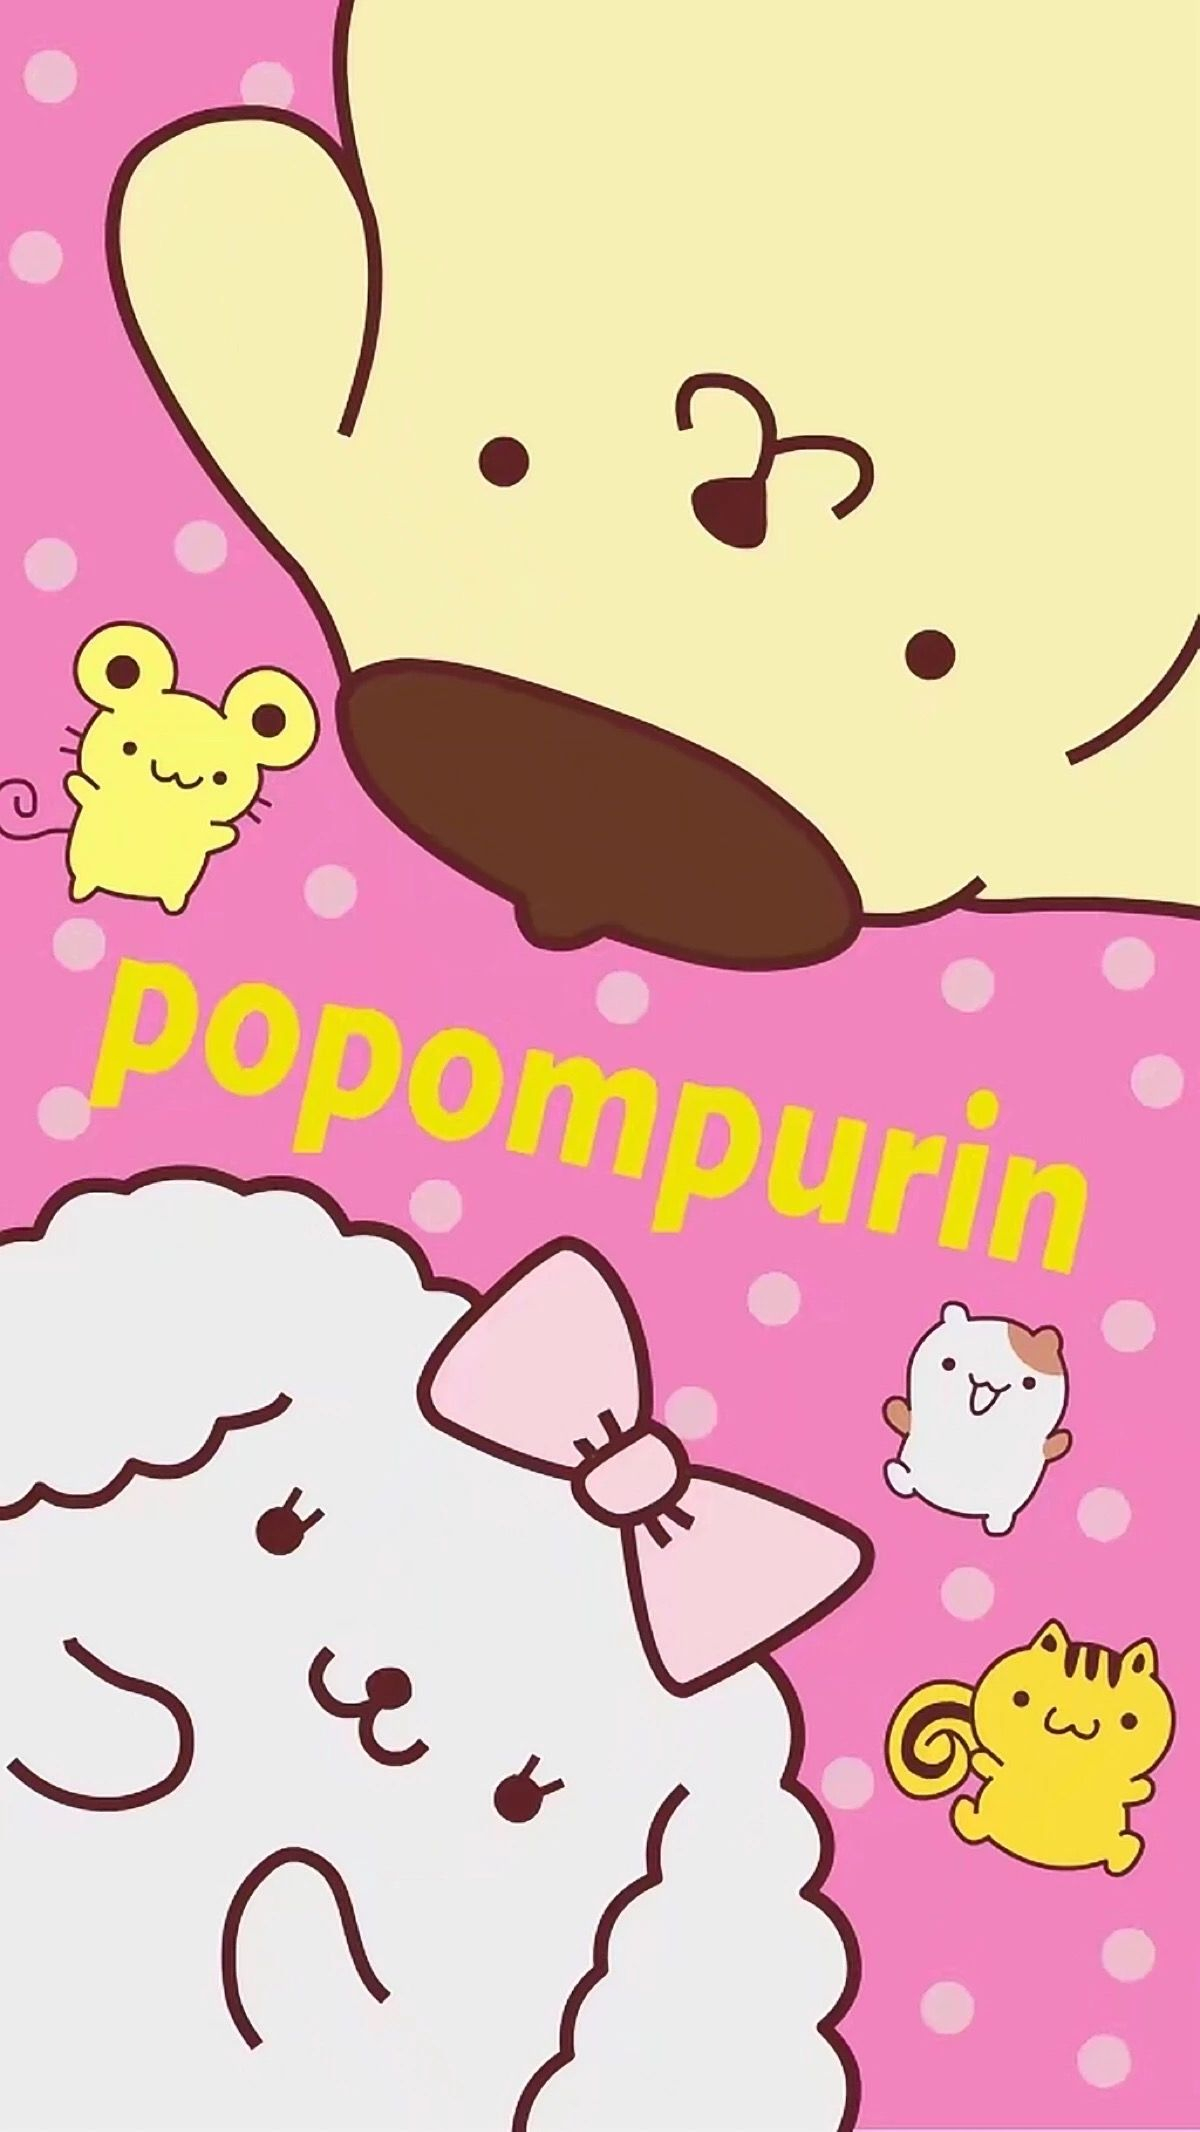 1200x2132 Pin by Pankeaw&agrave;&cedil;&#155;&agrave;&sup1;&#136;&agrave;&cedil;&sup2;&agrave;&cedil;&#153;&agrave;&sup1;&#129;&agrave;&cedil;&#129;&agrave;&sup1;&#137;&agrave;&cedil;&sect; on Pom pom purin | Rilakkuma wallpaper, Sanrio wallpaper, Sanrio characters